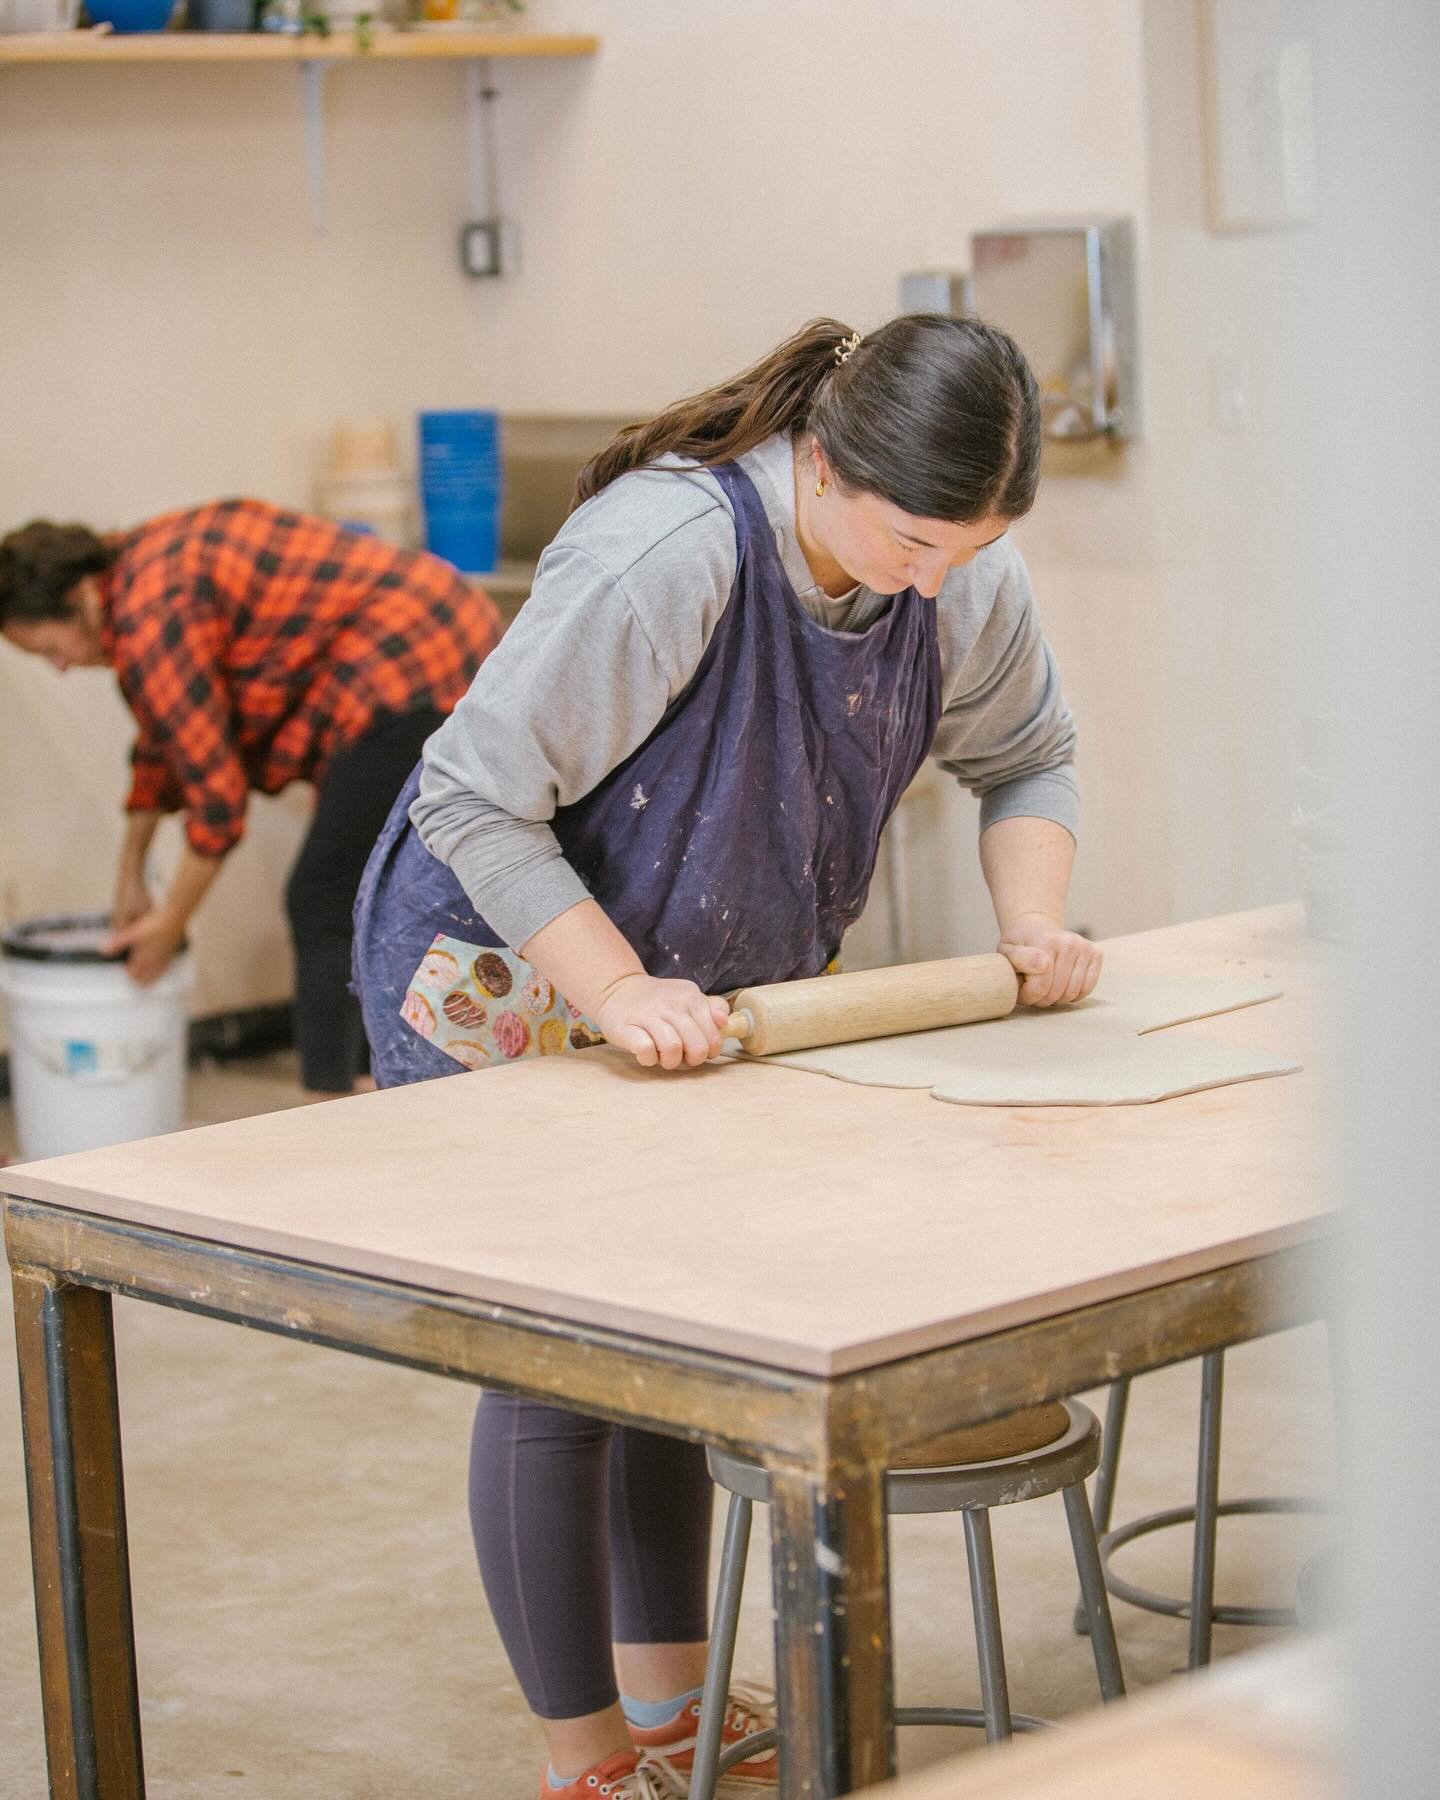 Do you want to take your hand-building skills to the next level? Come join our Introductory Hand-Building Course on Thursday evenings, from 5/16 - 6/20 🤍 Here you&rsquo;ll learn new techniques including pinch, coil, and slab building! See you there!